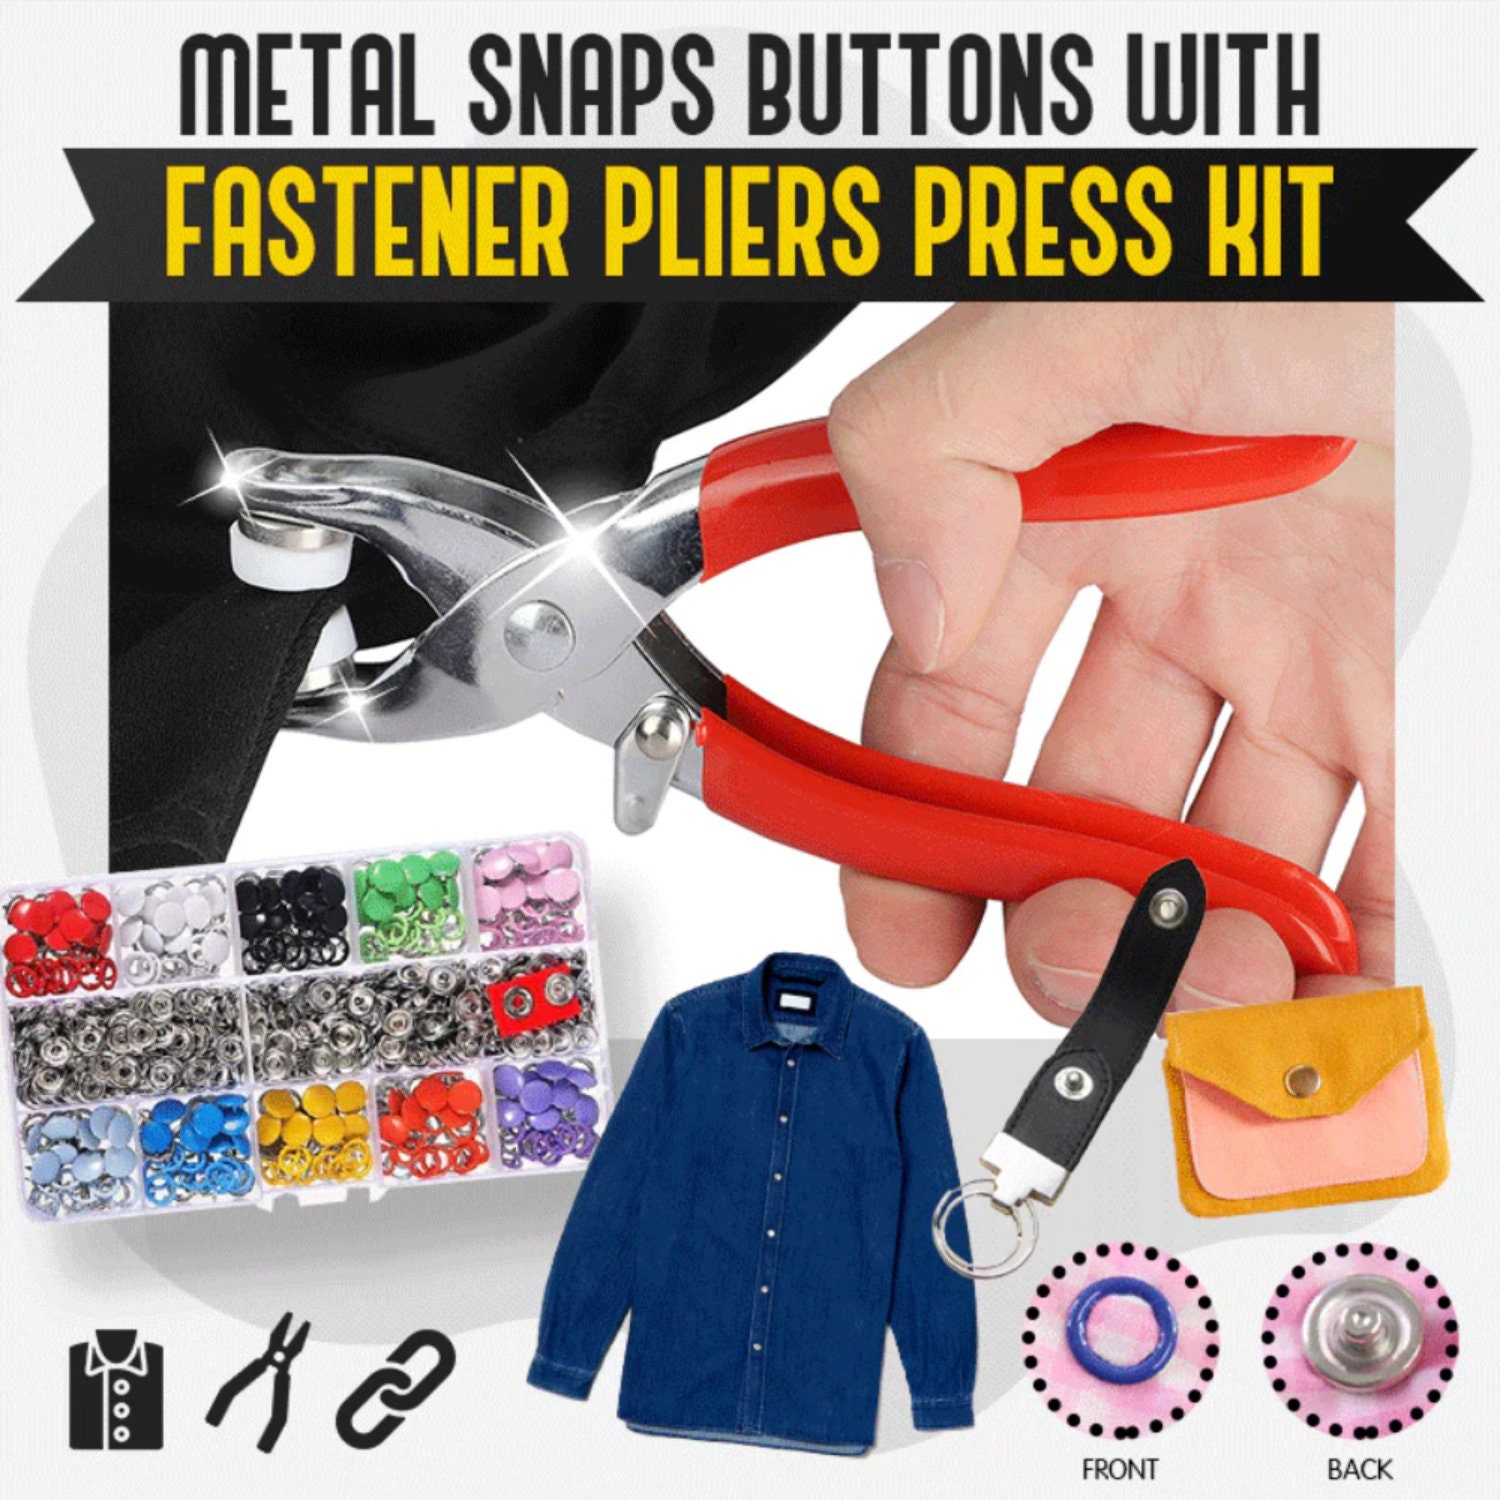 Cheap 50/100 Snap Fasteners Kit DIY Sewing Buttons Set Hand Pressure Pliers  Tool Metal Snap Buttons with Fastener Pliers Tool Kit